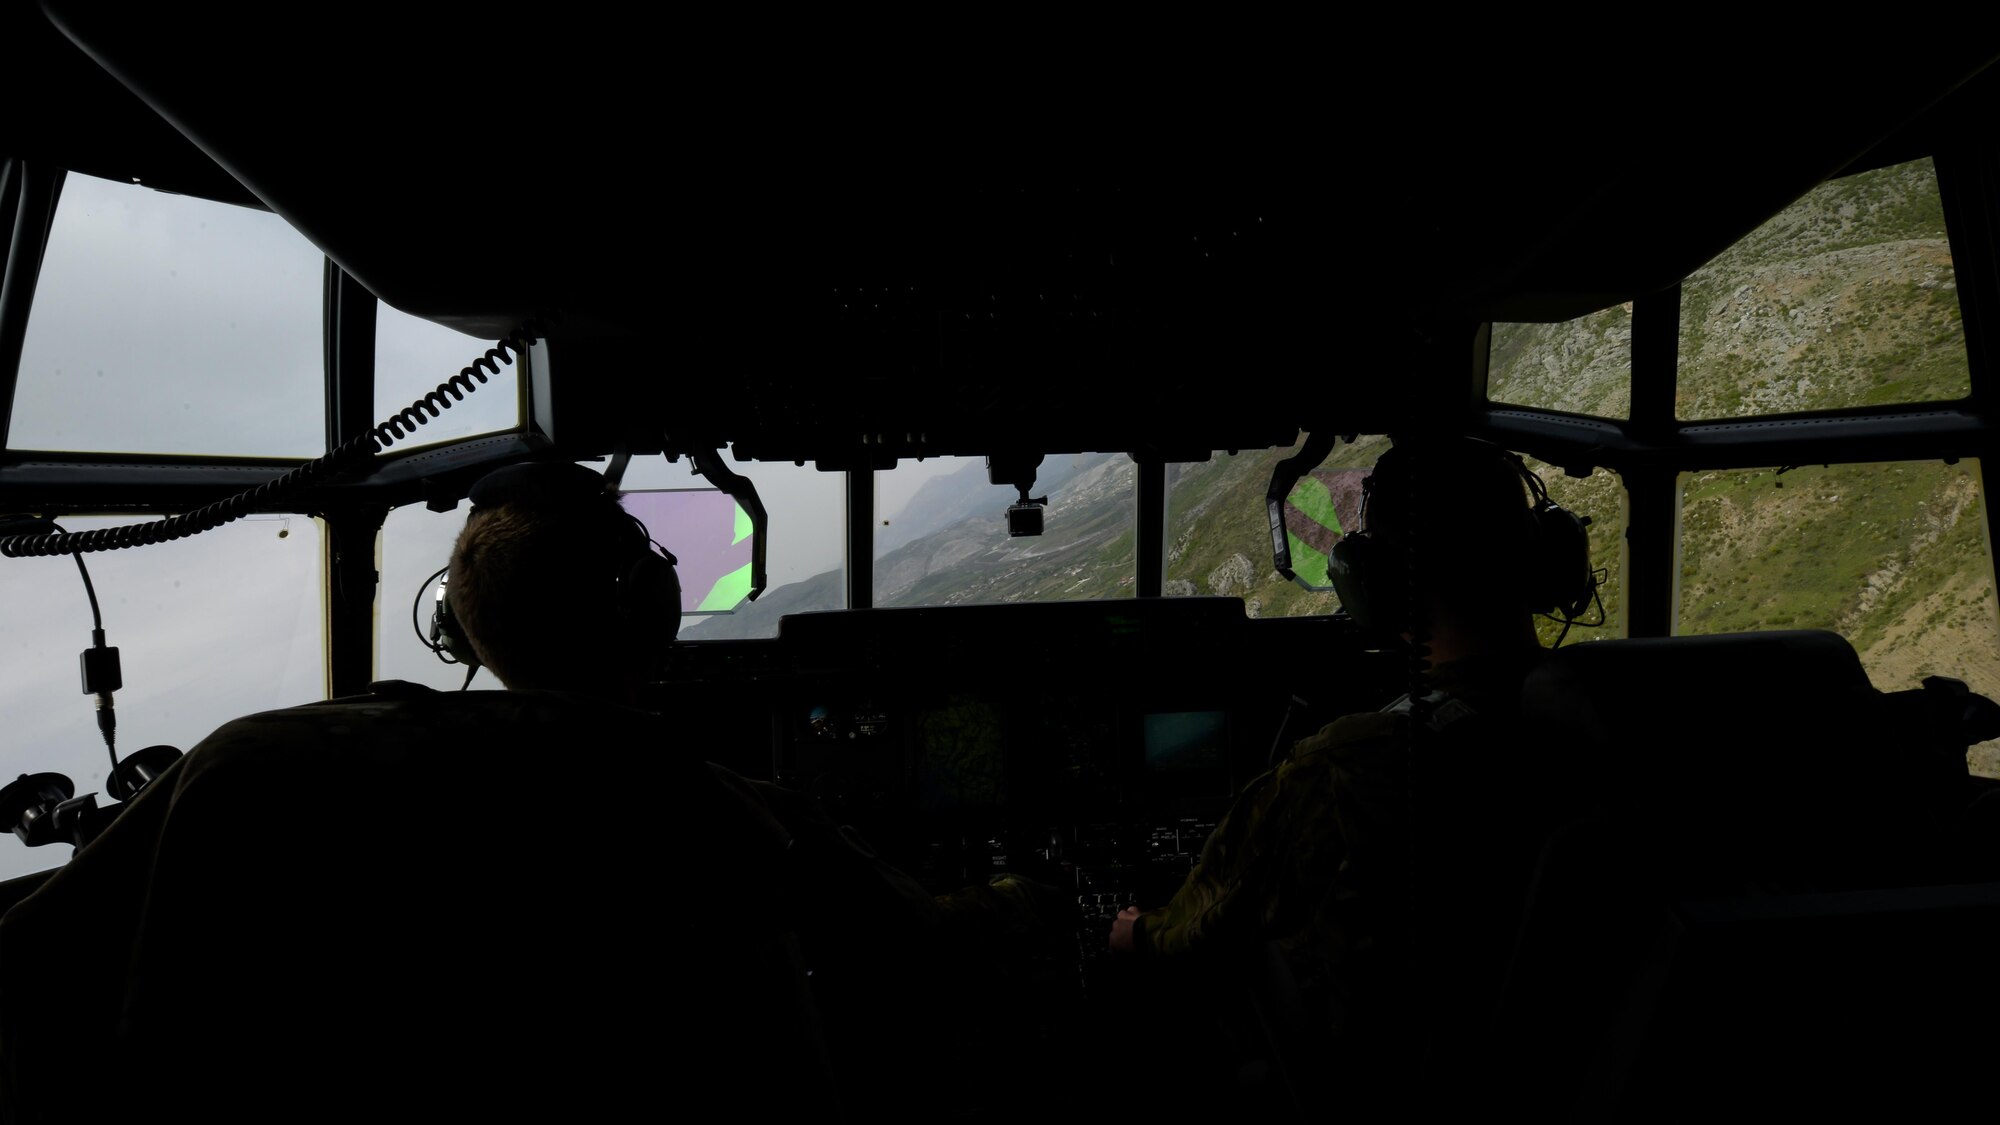 U.S. Air Force pilots aboard an MC-130J Commando II assigned to the 67th Special Operations Squadron conducted low-level operations during an exercise April 13, 2016, over Albania. The aircraft was one of two MC-130Js that conducted unilateral formation low-level operations as a part of a multi-operation training deployment. (U.S. Air Force photo by Senior Airman Victoria H. Taylor/Released)